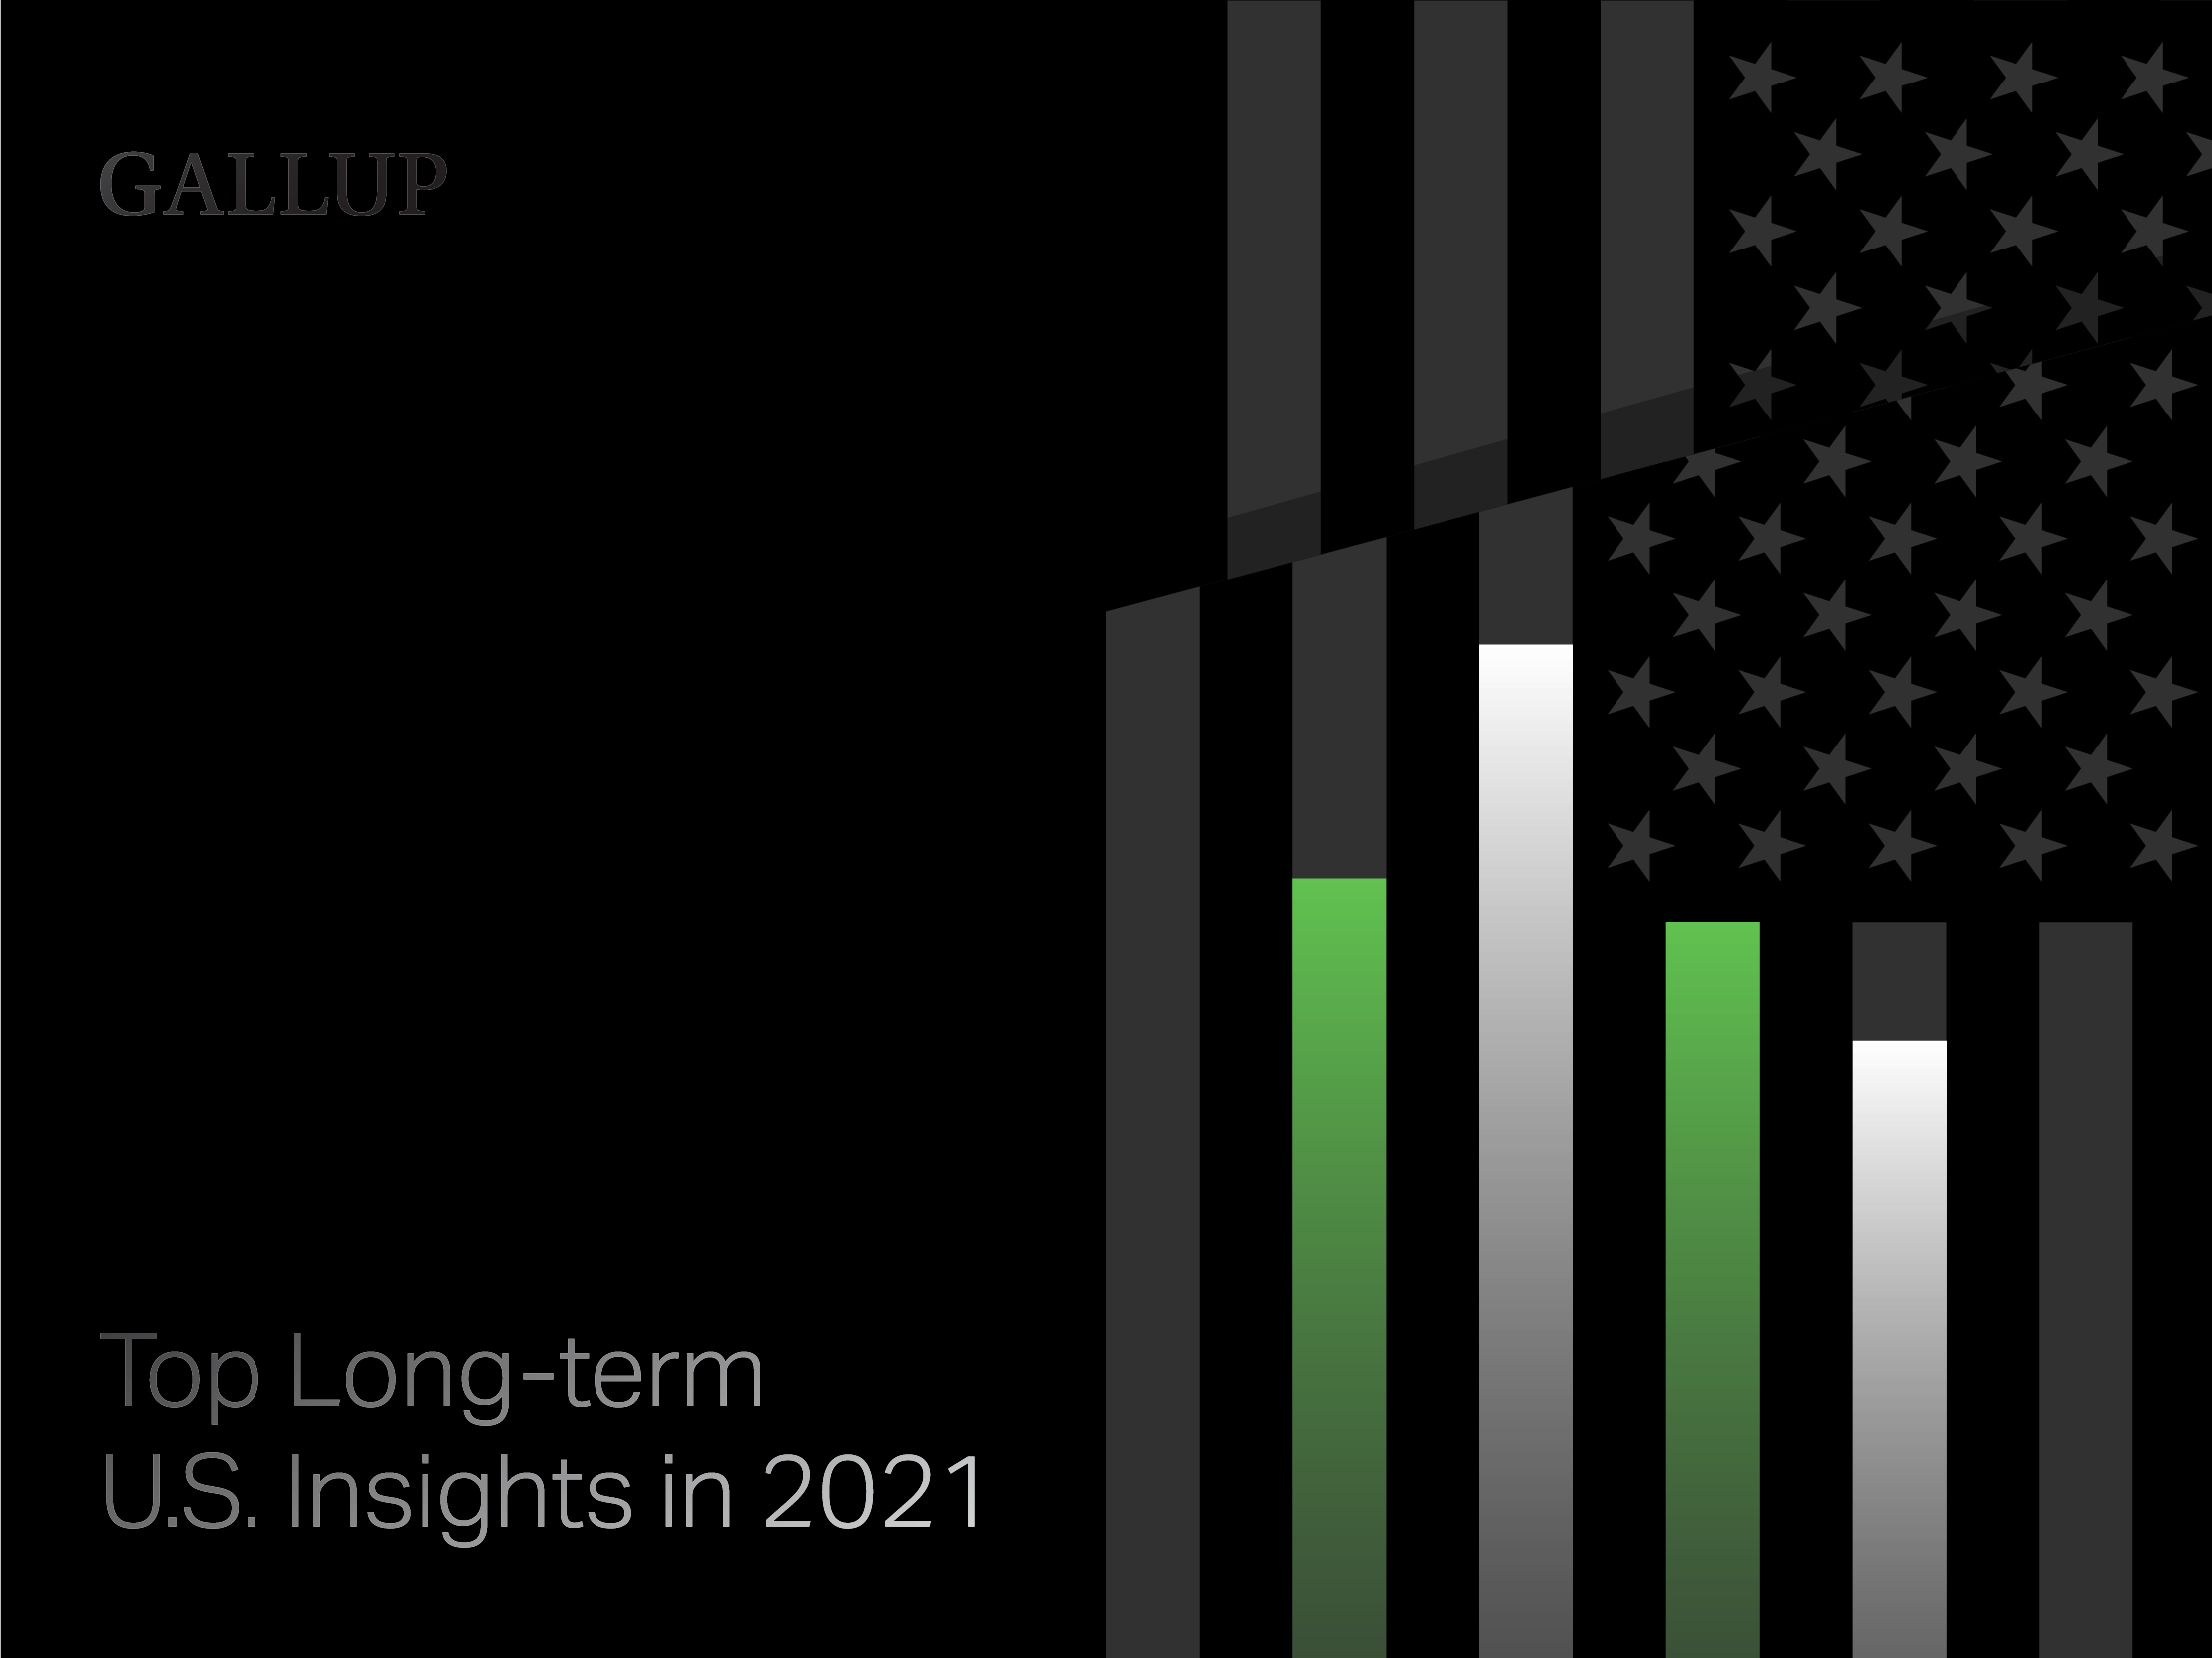 Top Long-term U.S. Insights From Gallup in 2021